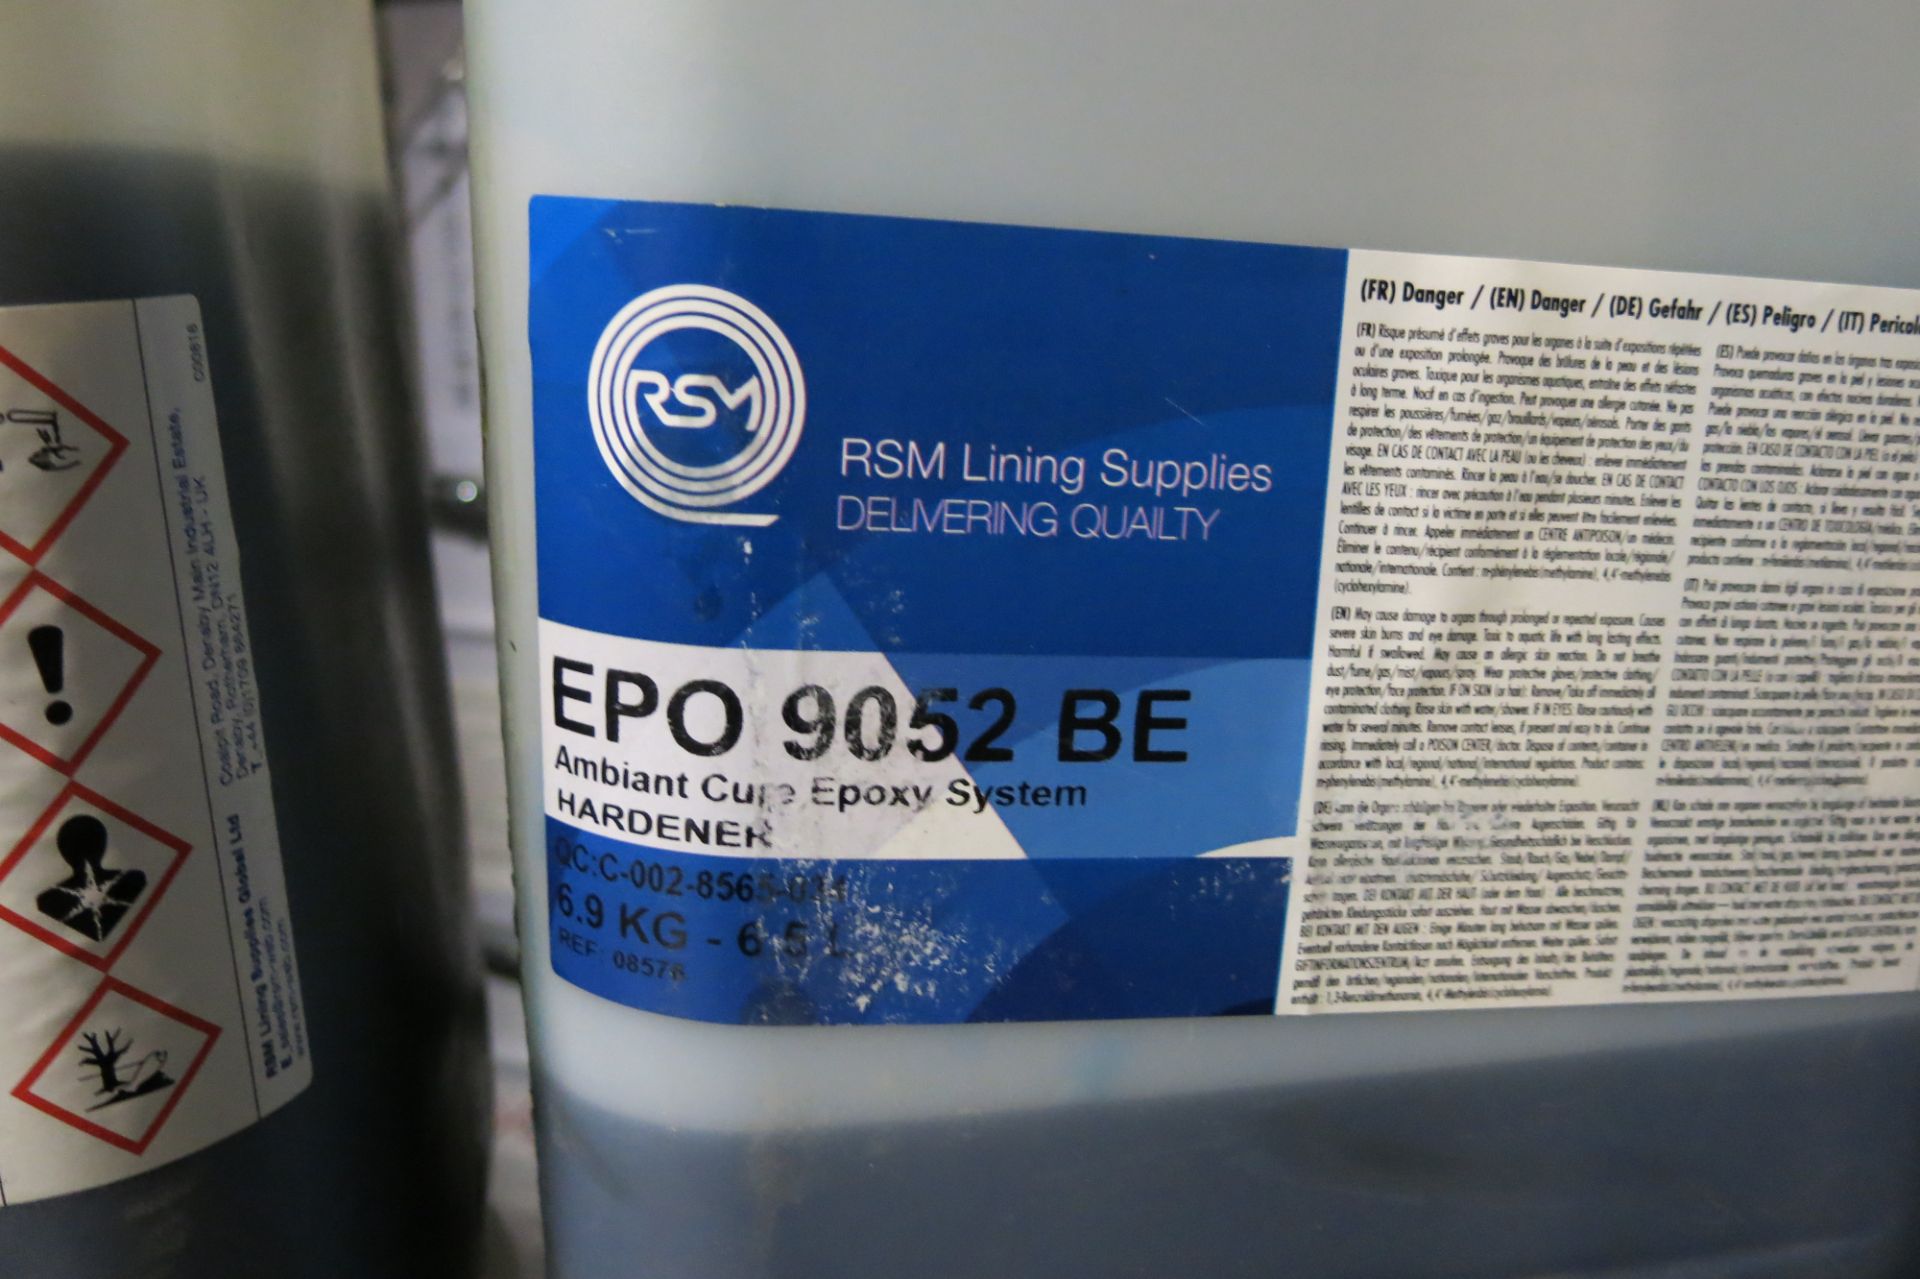 LOT OF RSM LINING, EPO 9052 BE, AMBIENT CURE EPOXY SYSTEM HARDENER - Image 2 of 2